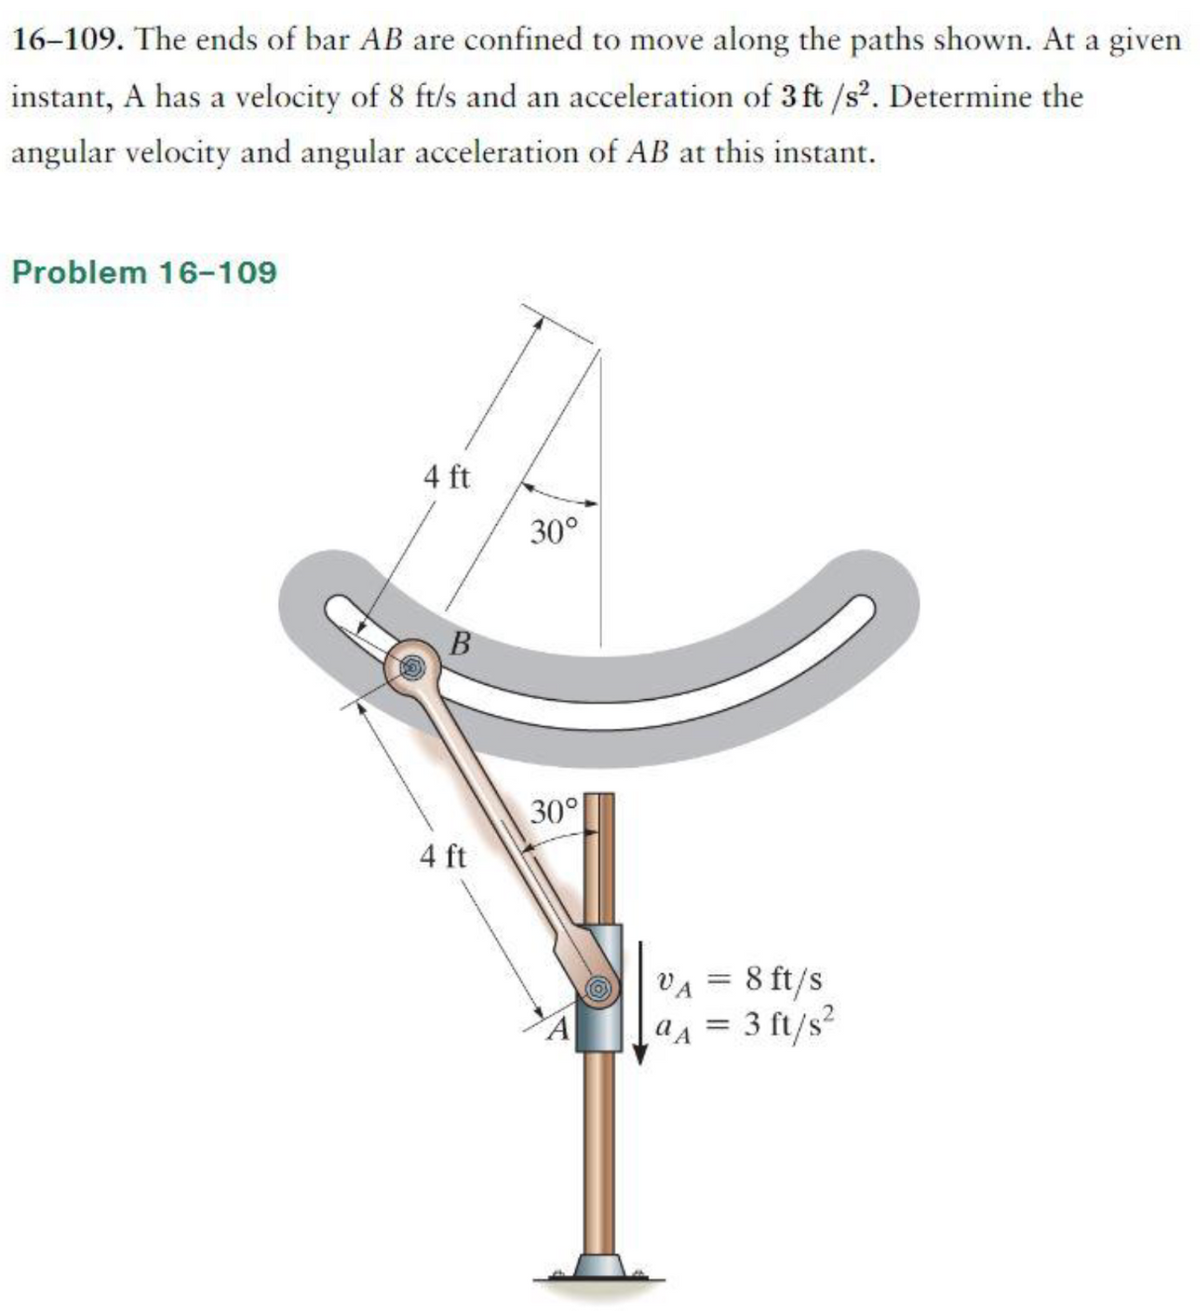 16-109. The ends of bar AB are confined to move along the paths shown. At a given
instant, A has a velocity of 8 ft/s and an acceleration of 3 ft /s². Determine the
angular velocity and angular acceleration of AB at this instant.
Problem 16-109
4 ft
B
4 ft
30°
30°
VA = 8 ft/s
aA = 3 ft/s²